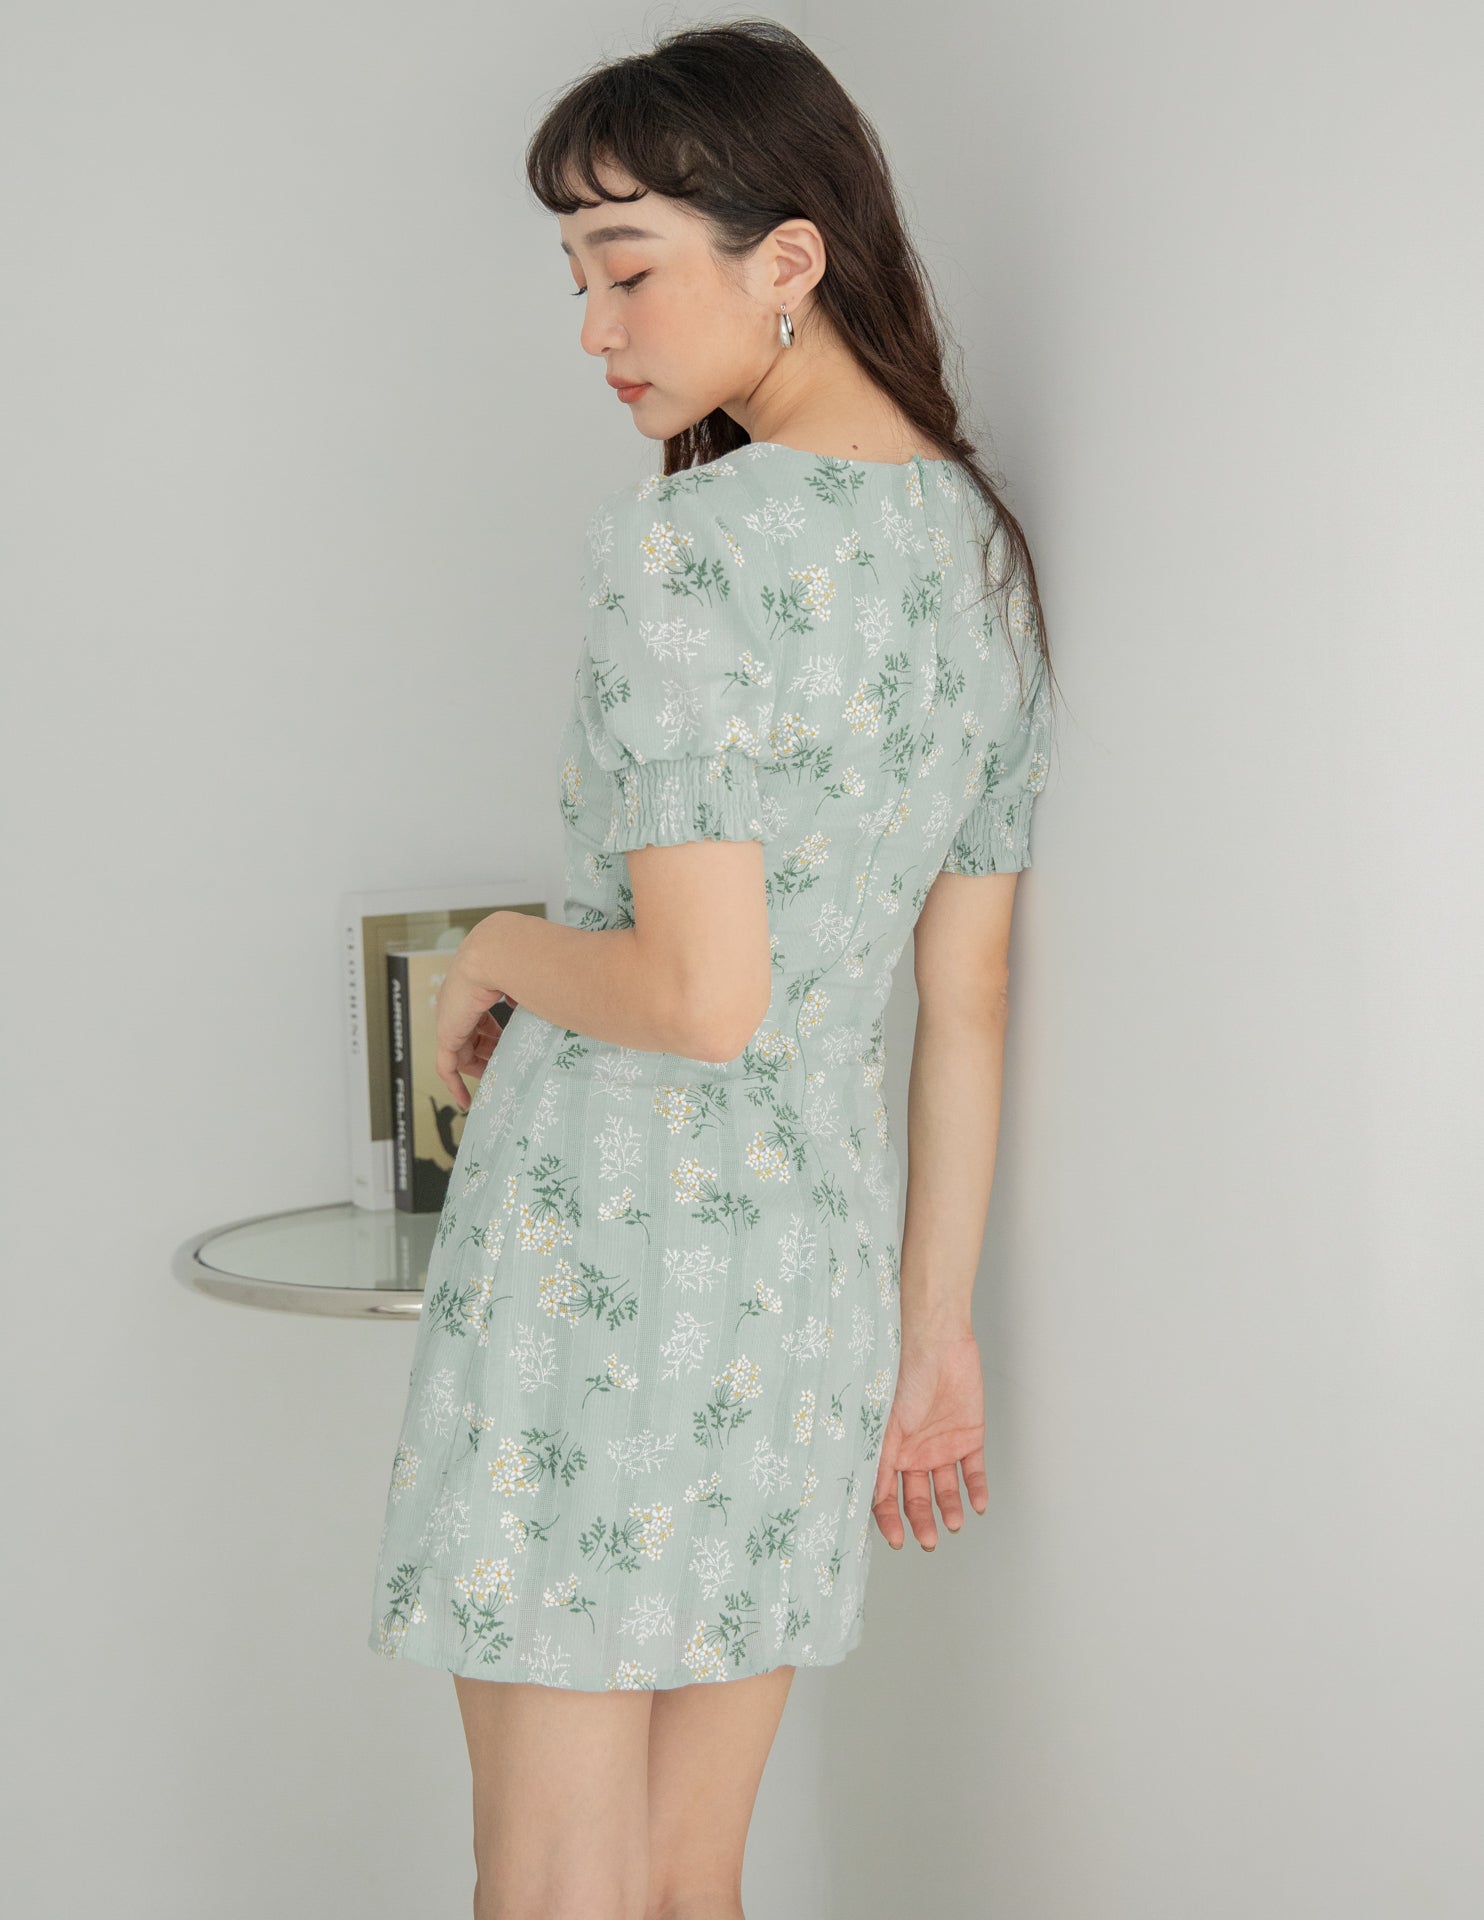 Trixie Floral Dress in Sage